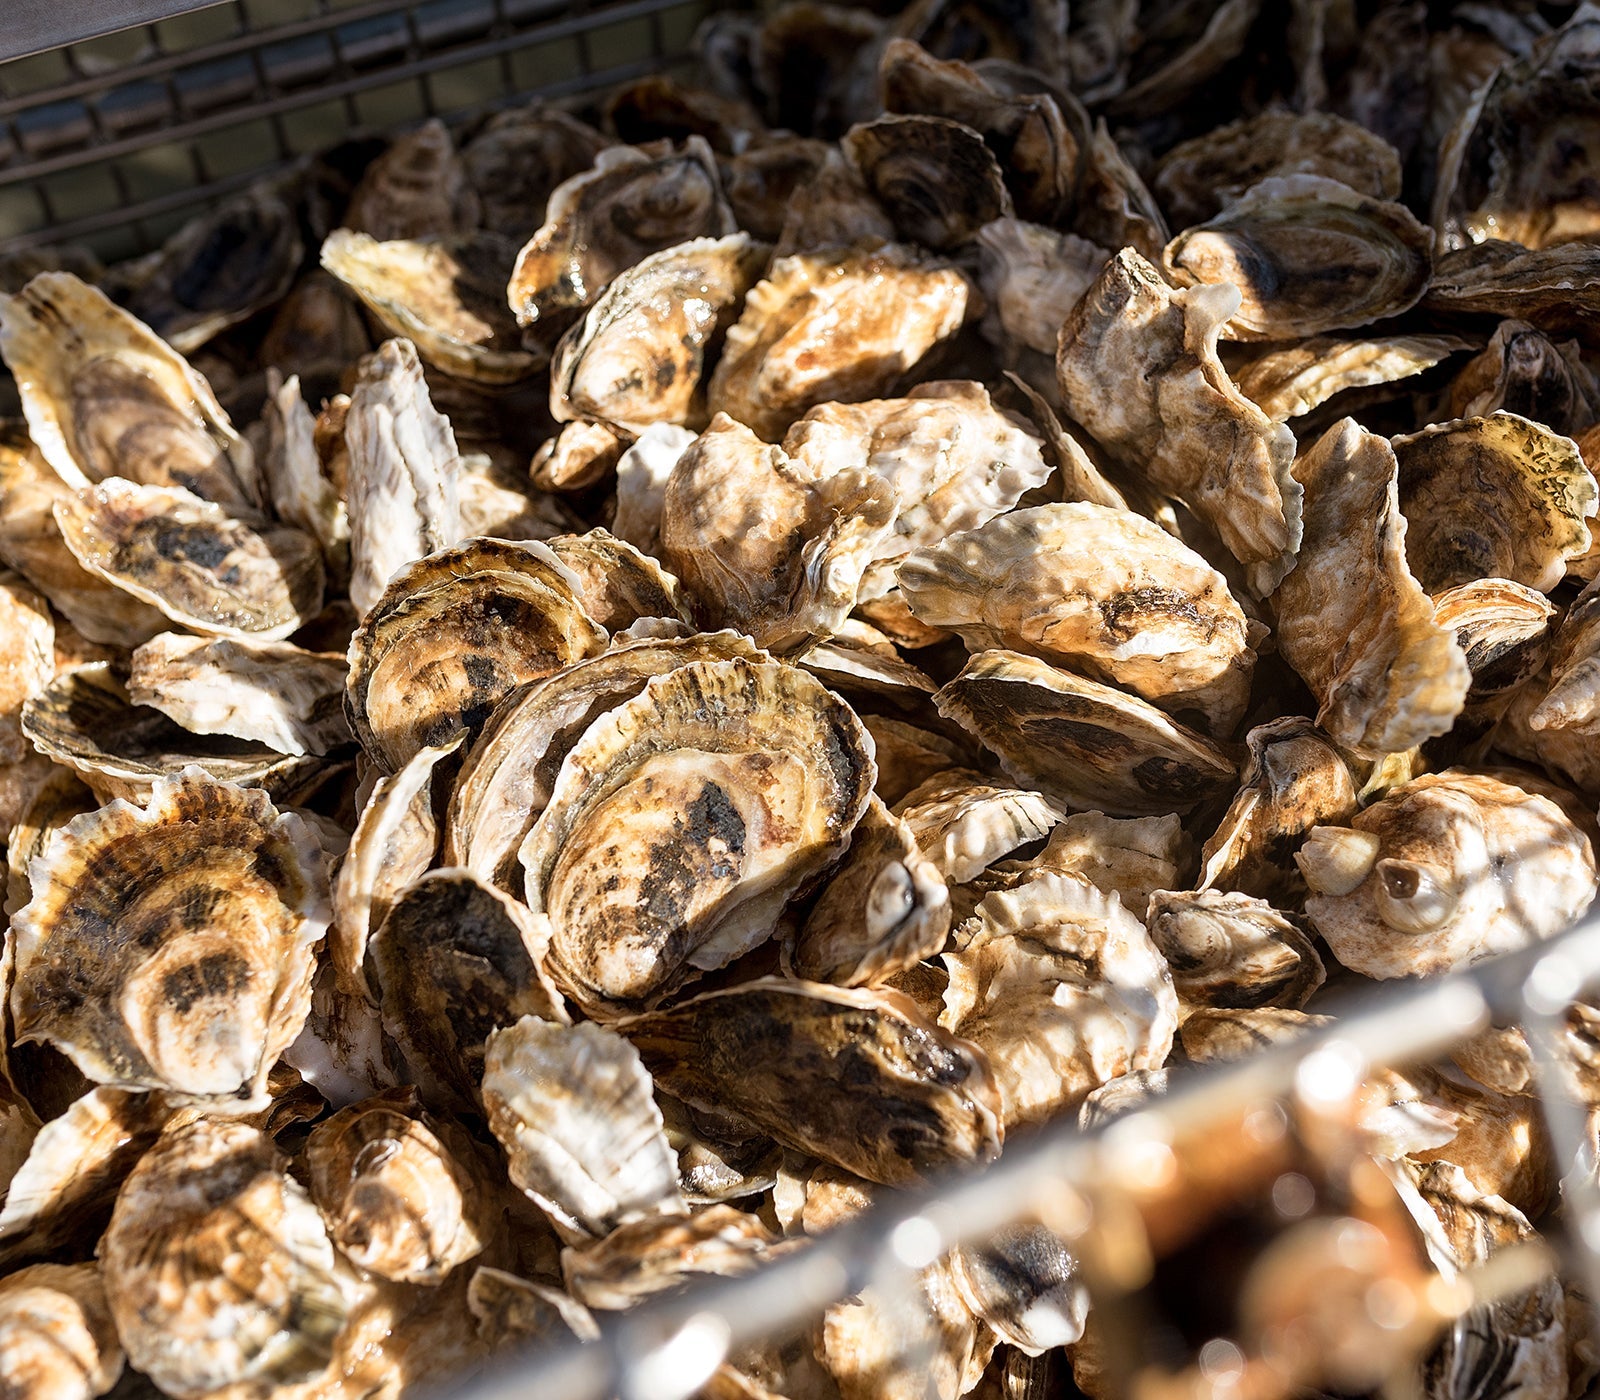 Sweet Neck Oysters from Martha's Vineyard, MA